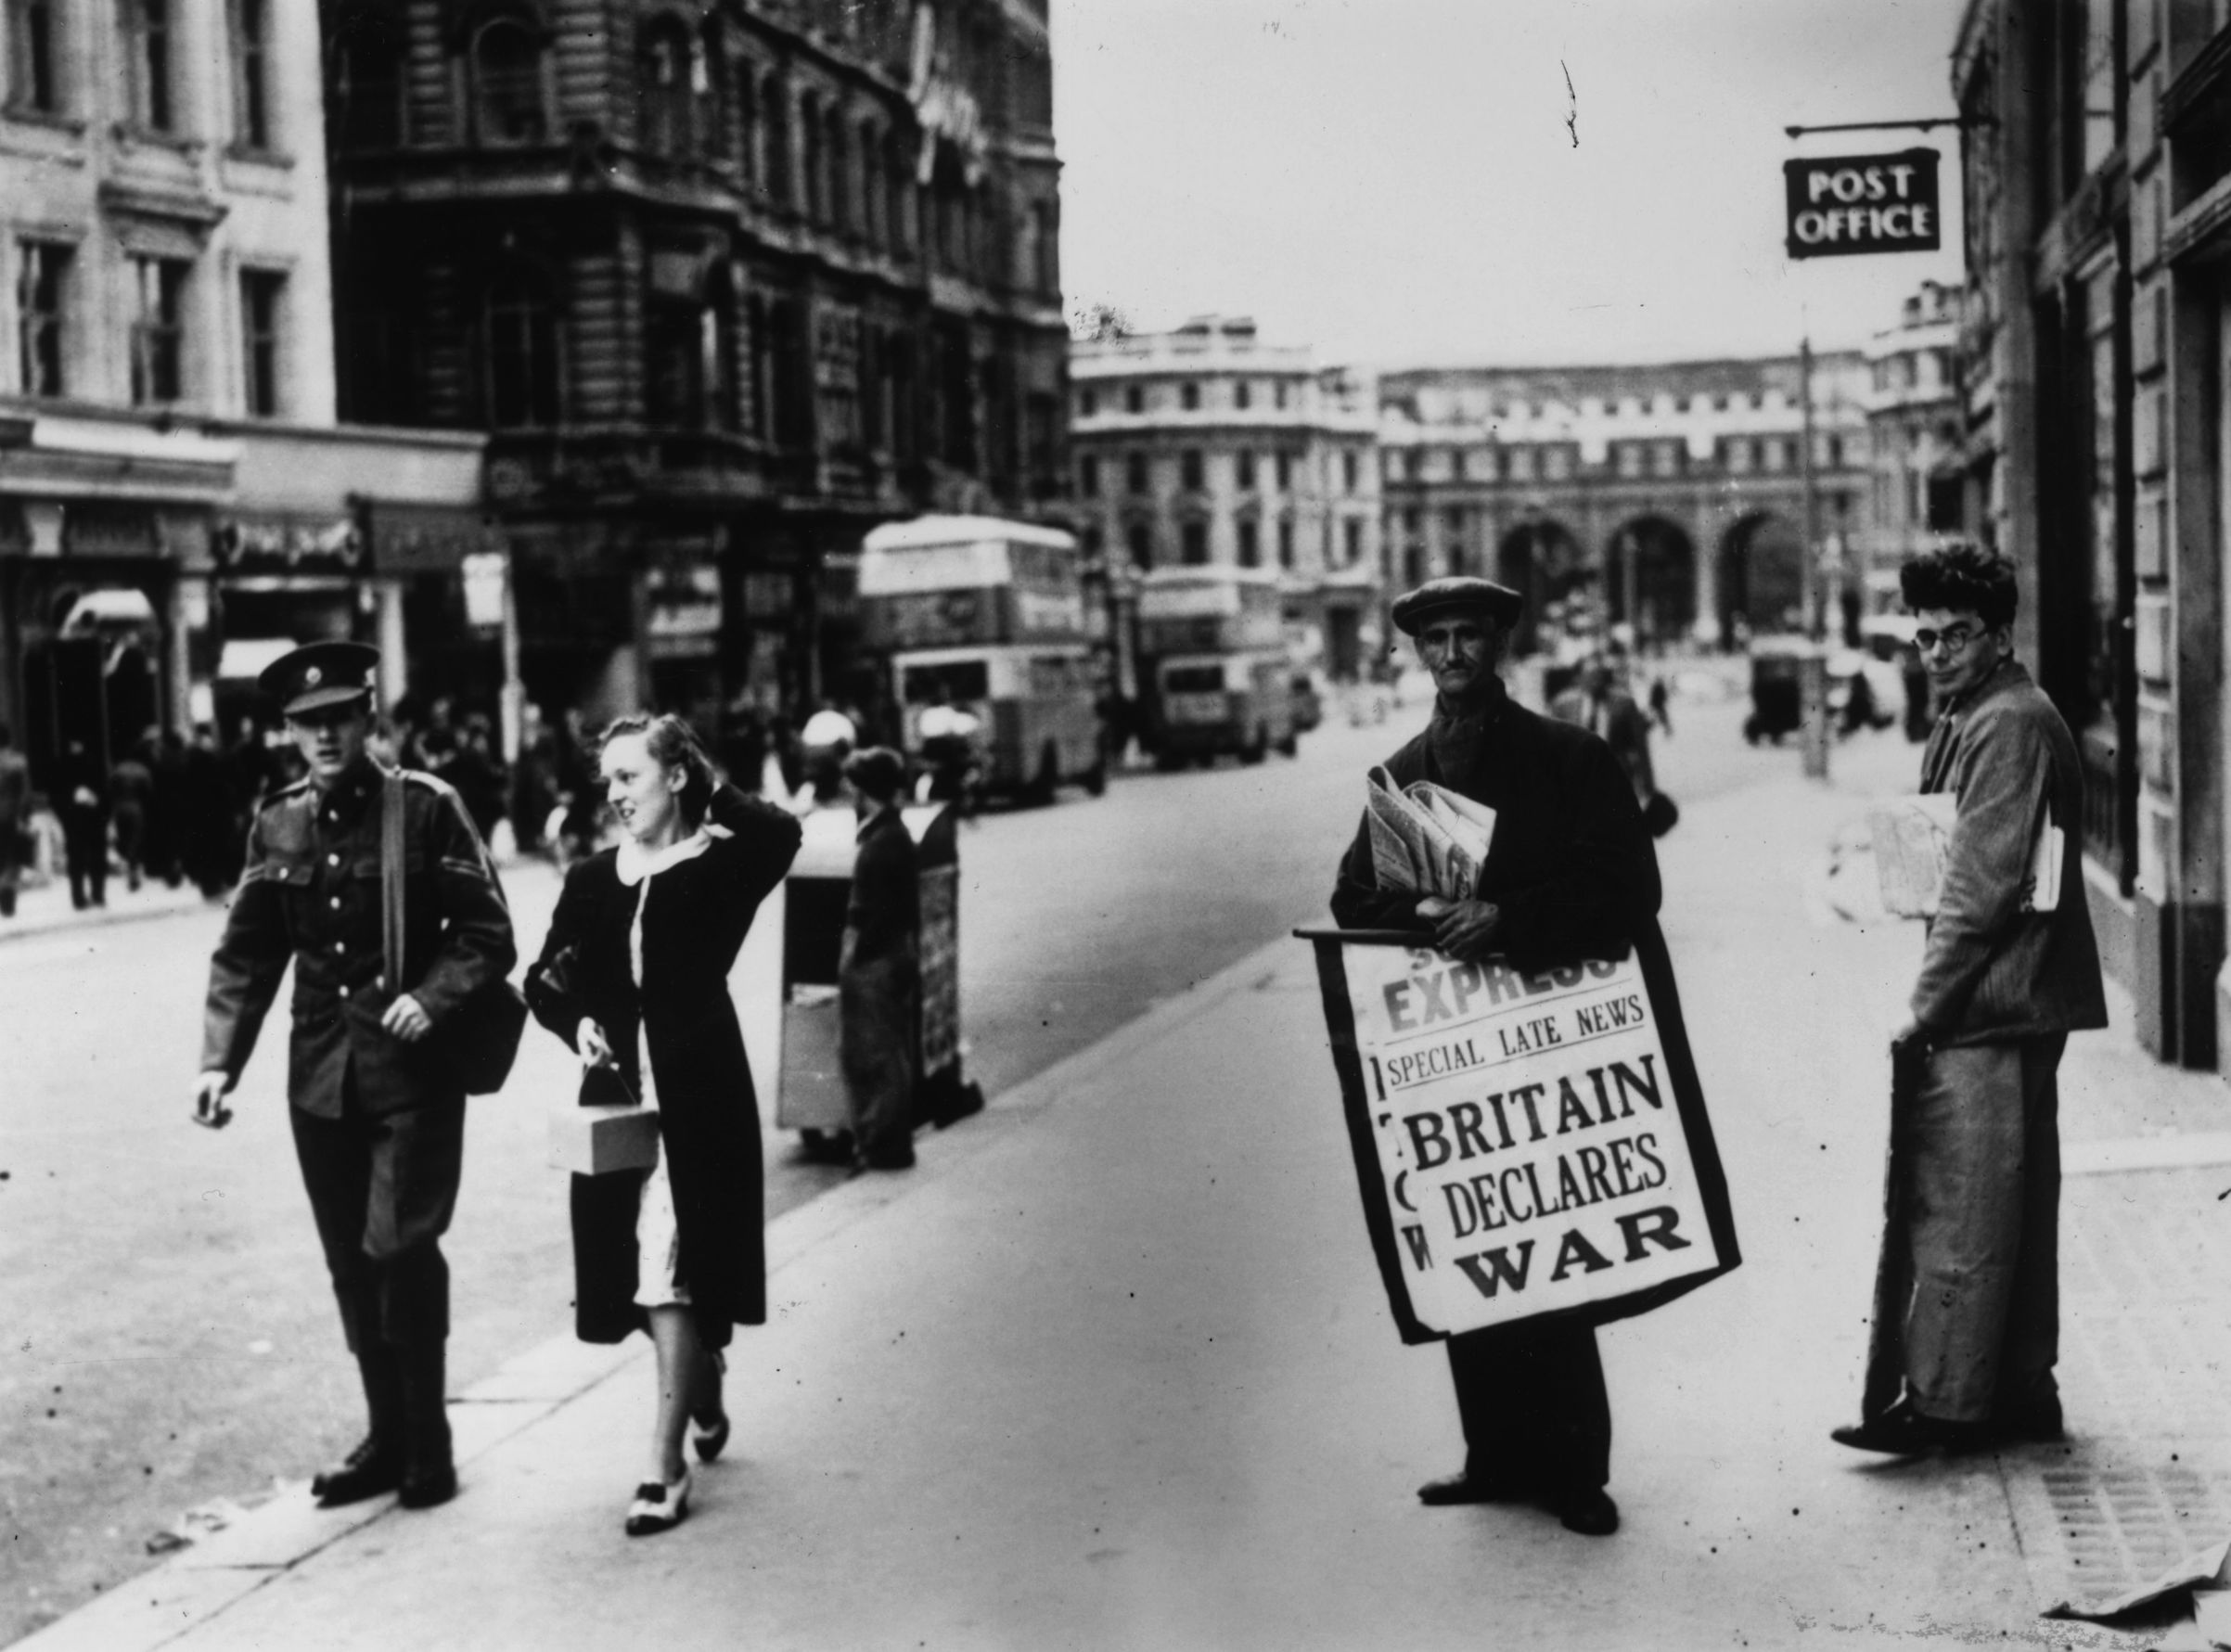 On Sept. 3, 1939, a newspaper seller carries a board  pronouncing the declaration of war between Britain and Germany, on the Strand, heading towards Admiralty Arch in London. (Central Press/Getty Images)